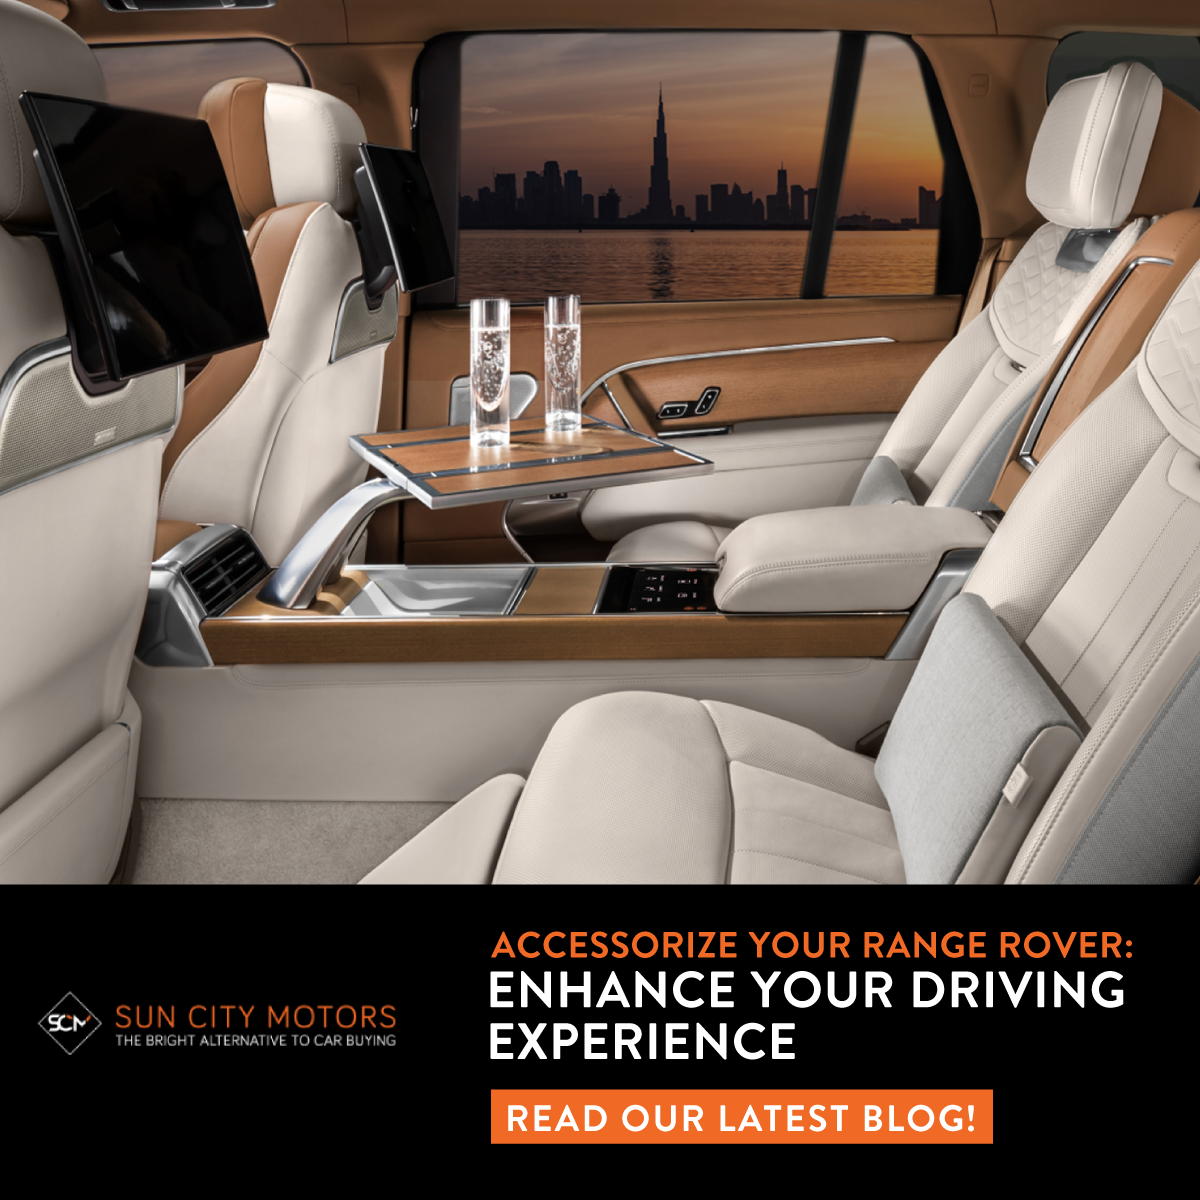 Accessorize Your Range Rover: Enhance Your Driving Experience